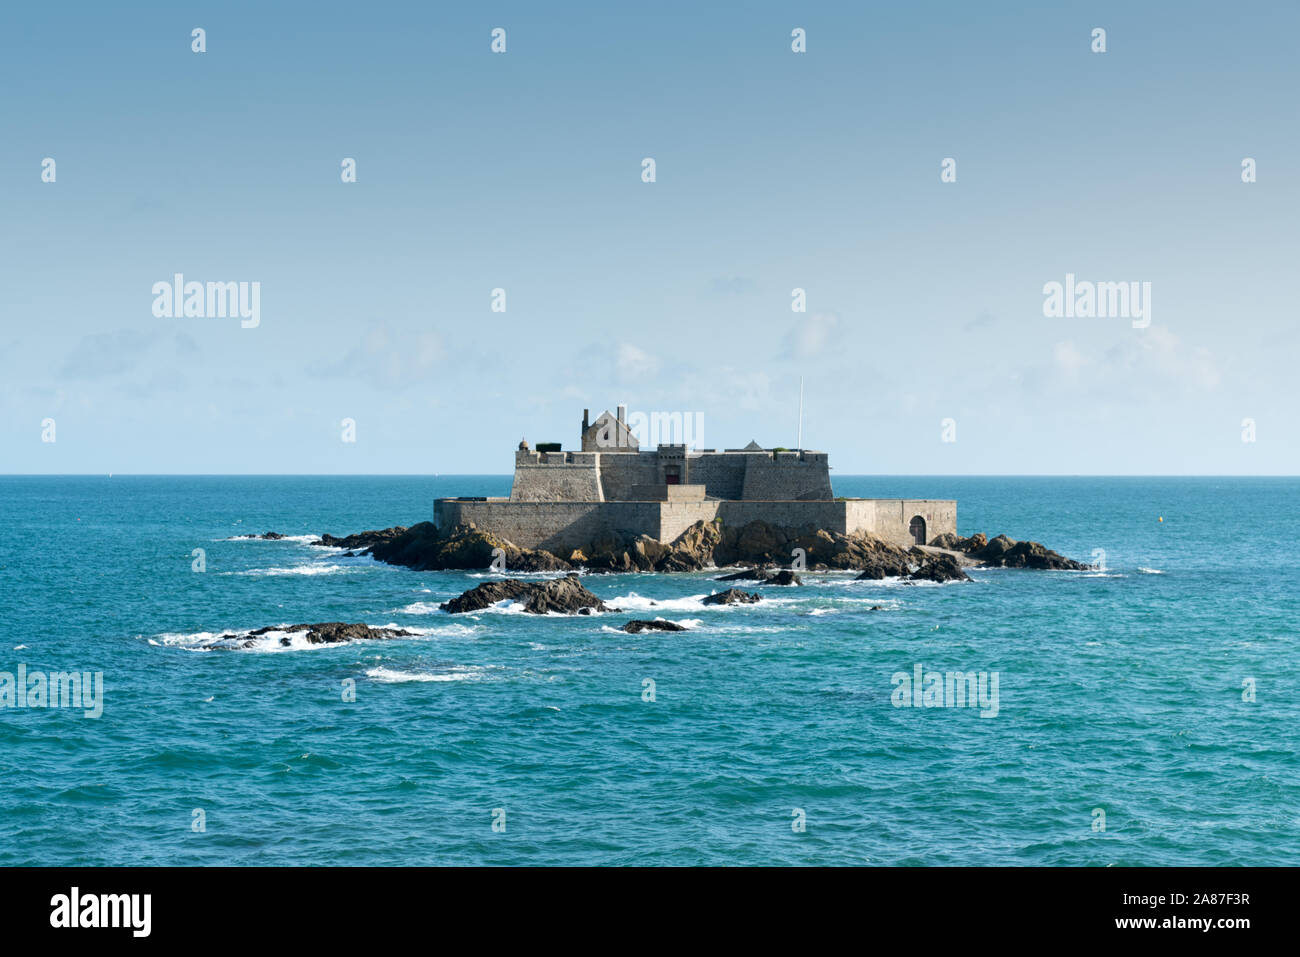 Saint-Malo, Ille-et-Vilaine / France - 19 August 2019: view of the fortress on the small island of Grand Be in the English Channel by Saint-Malo Stock Photo